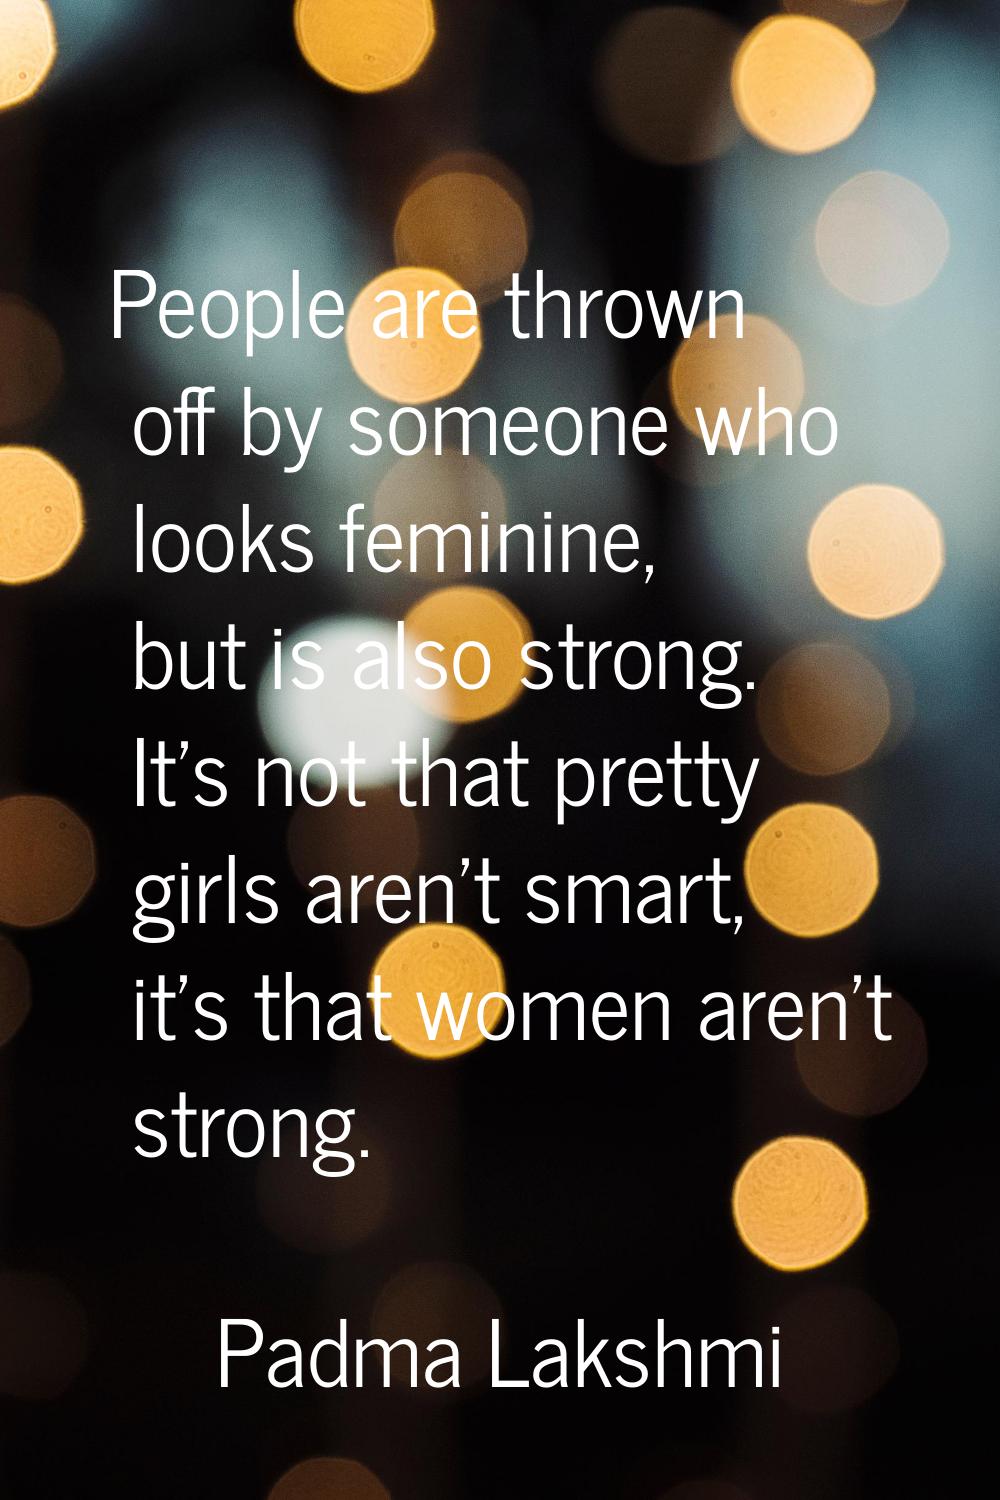 People are thrown off by someone who looks feminine, but is also strong. It's not that pretty girls